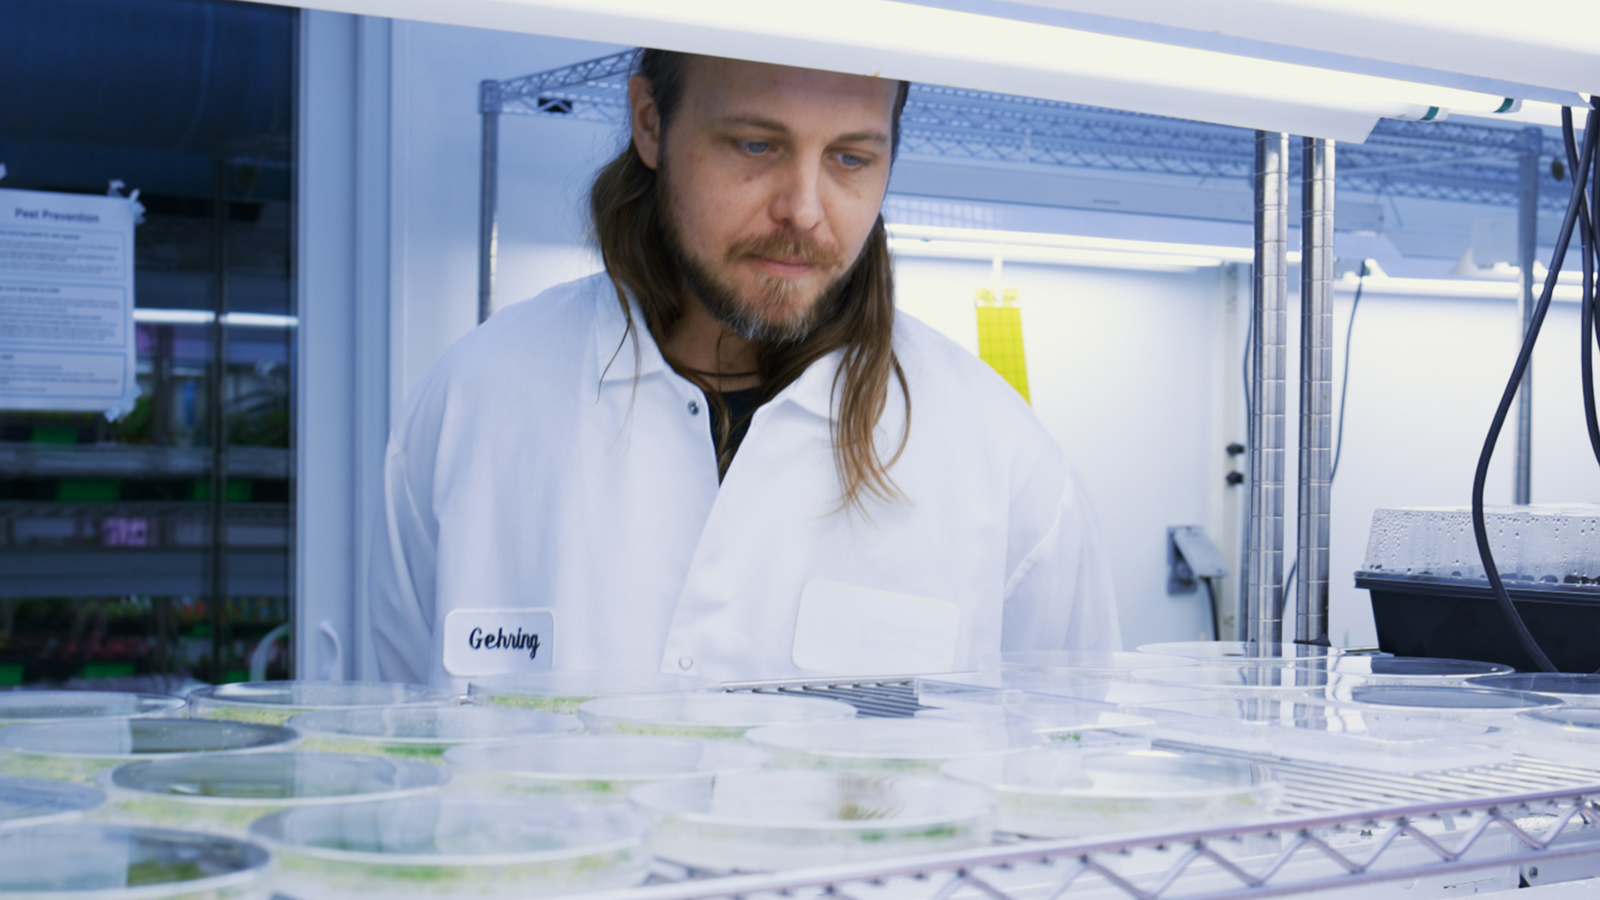 A man with a beard and long hair wearing a white lab coat and looking at samples in a lab